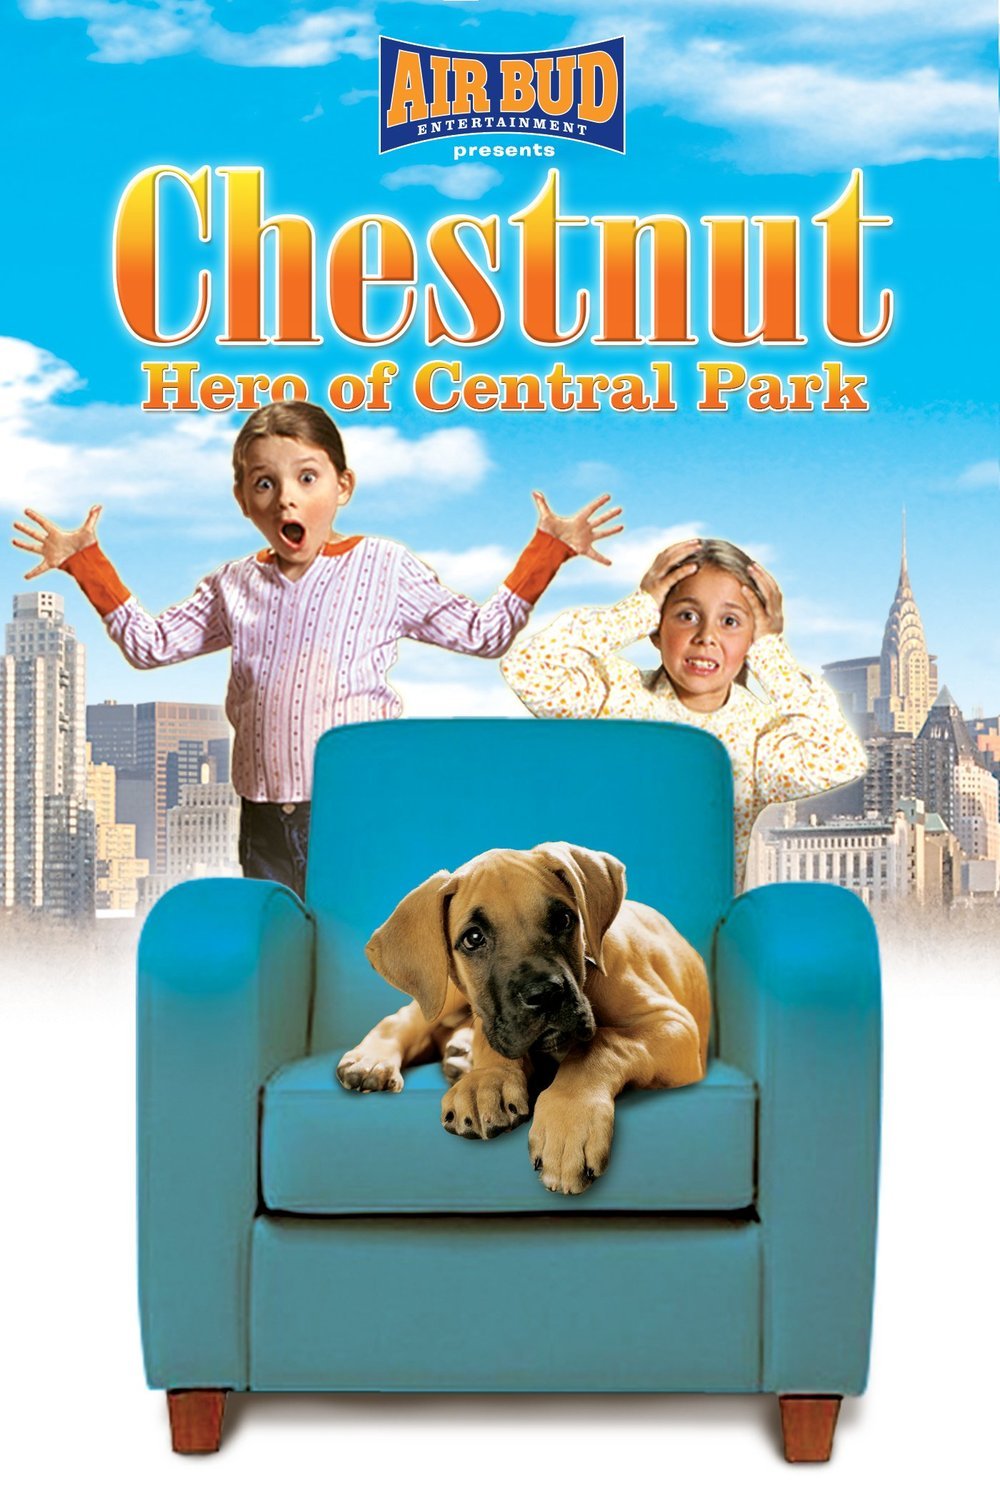 Poster of the movie Chestnut: Hero of Central Park